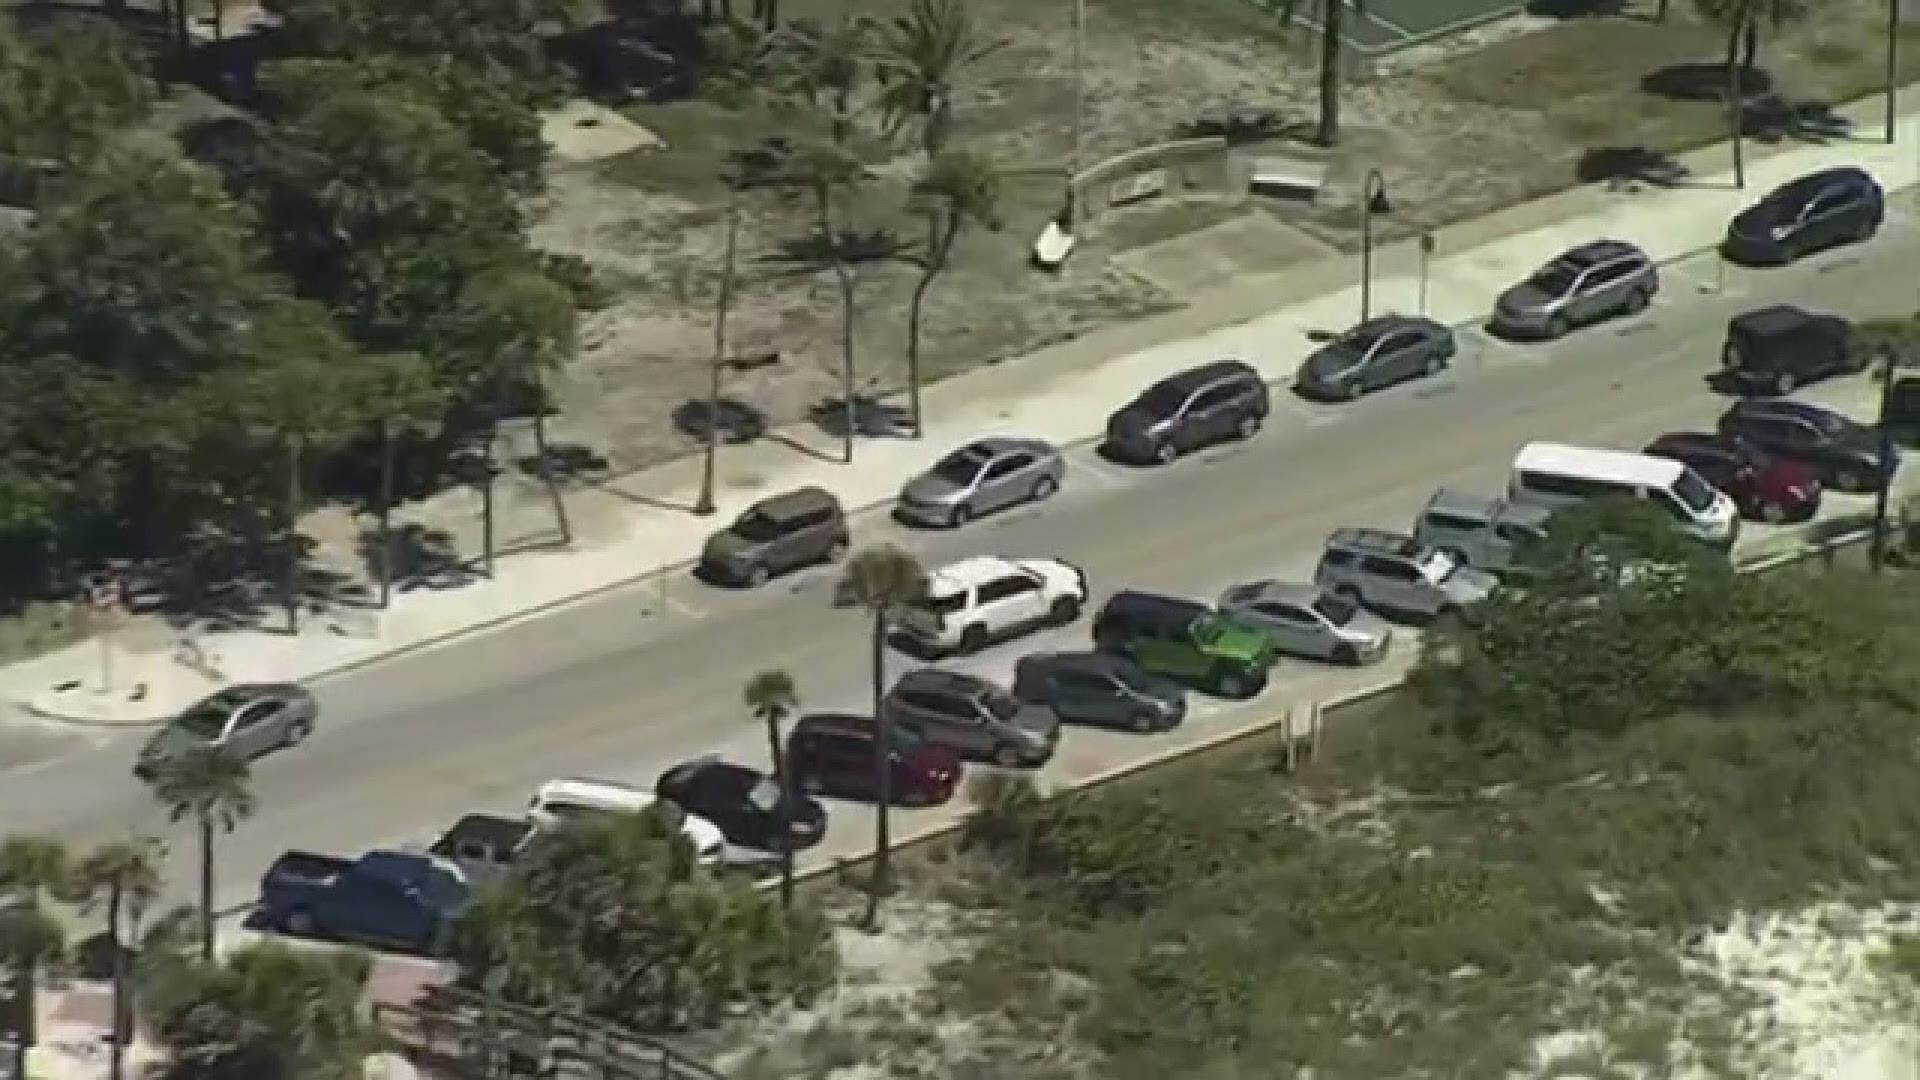 A big parking lot at a popular Pinellas County beach was shut down only hours after it opened on the first day as part of Florida's phase one reopening.